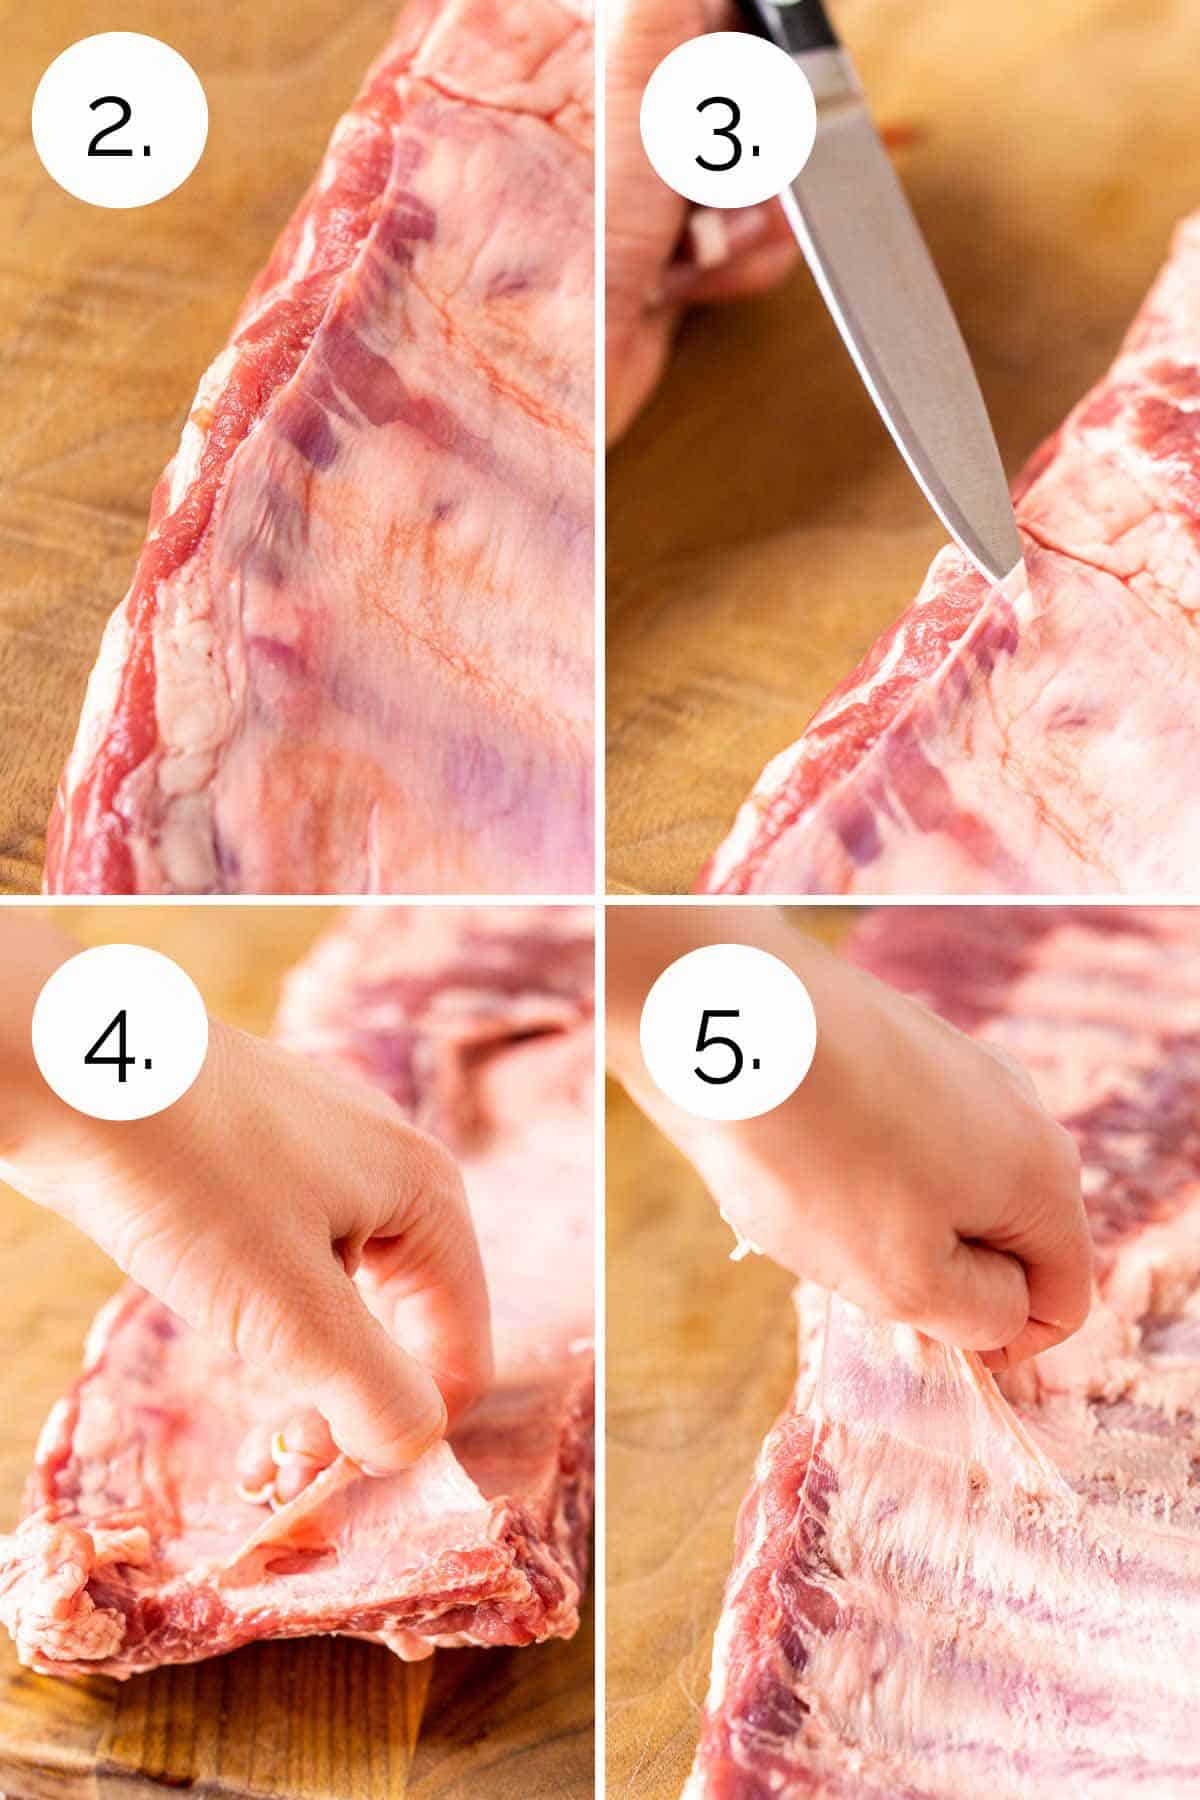 A collage showing the process of using a knife and fingers to remove the membrane from the ribs.